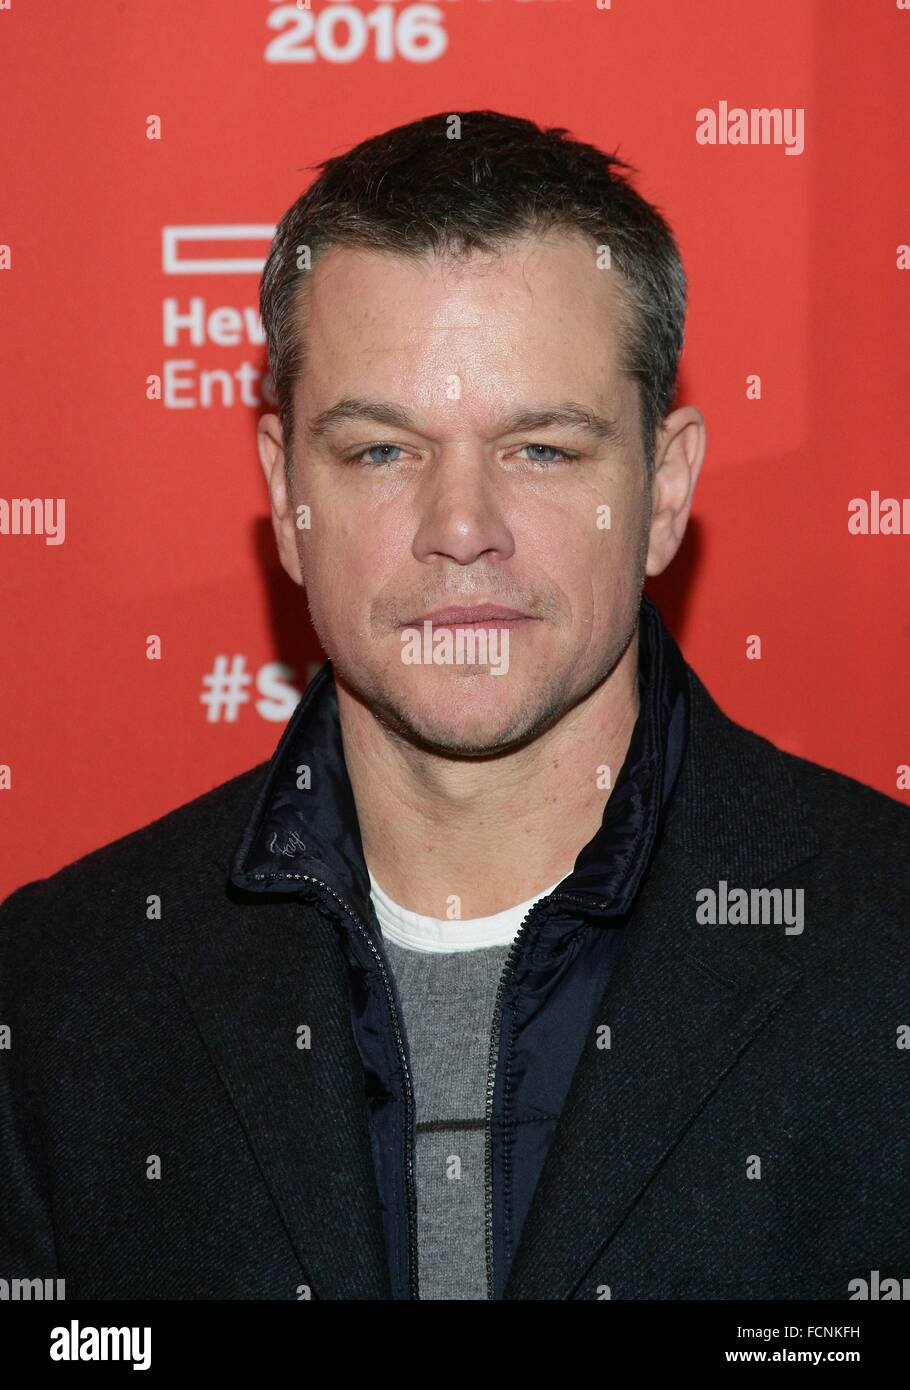 Park City, UT, USA. 23rd Jan, 2016. Matt Damon at arrivals for MANCHESTER BY THE SEA Premiere at Sundance Film Festival 2016, The Eccles Center for the Performing Arts, Park City, UT January 23, 2016. © James Atoa/Everett Collection/Alamy Live News Stock Photo